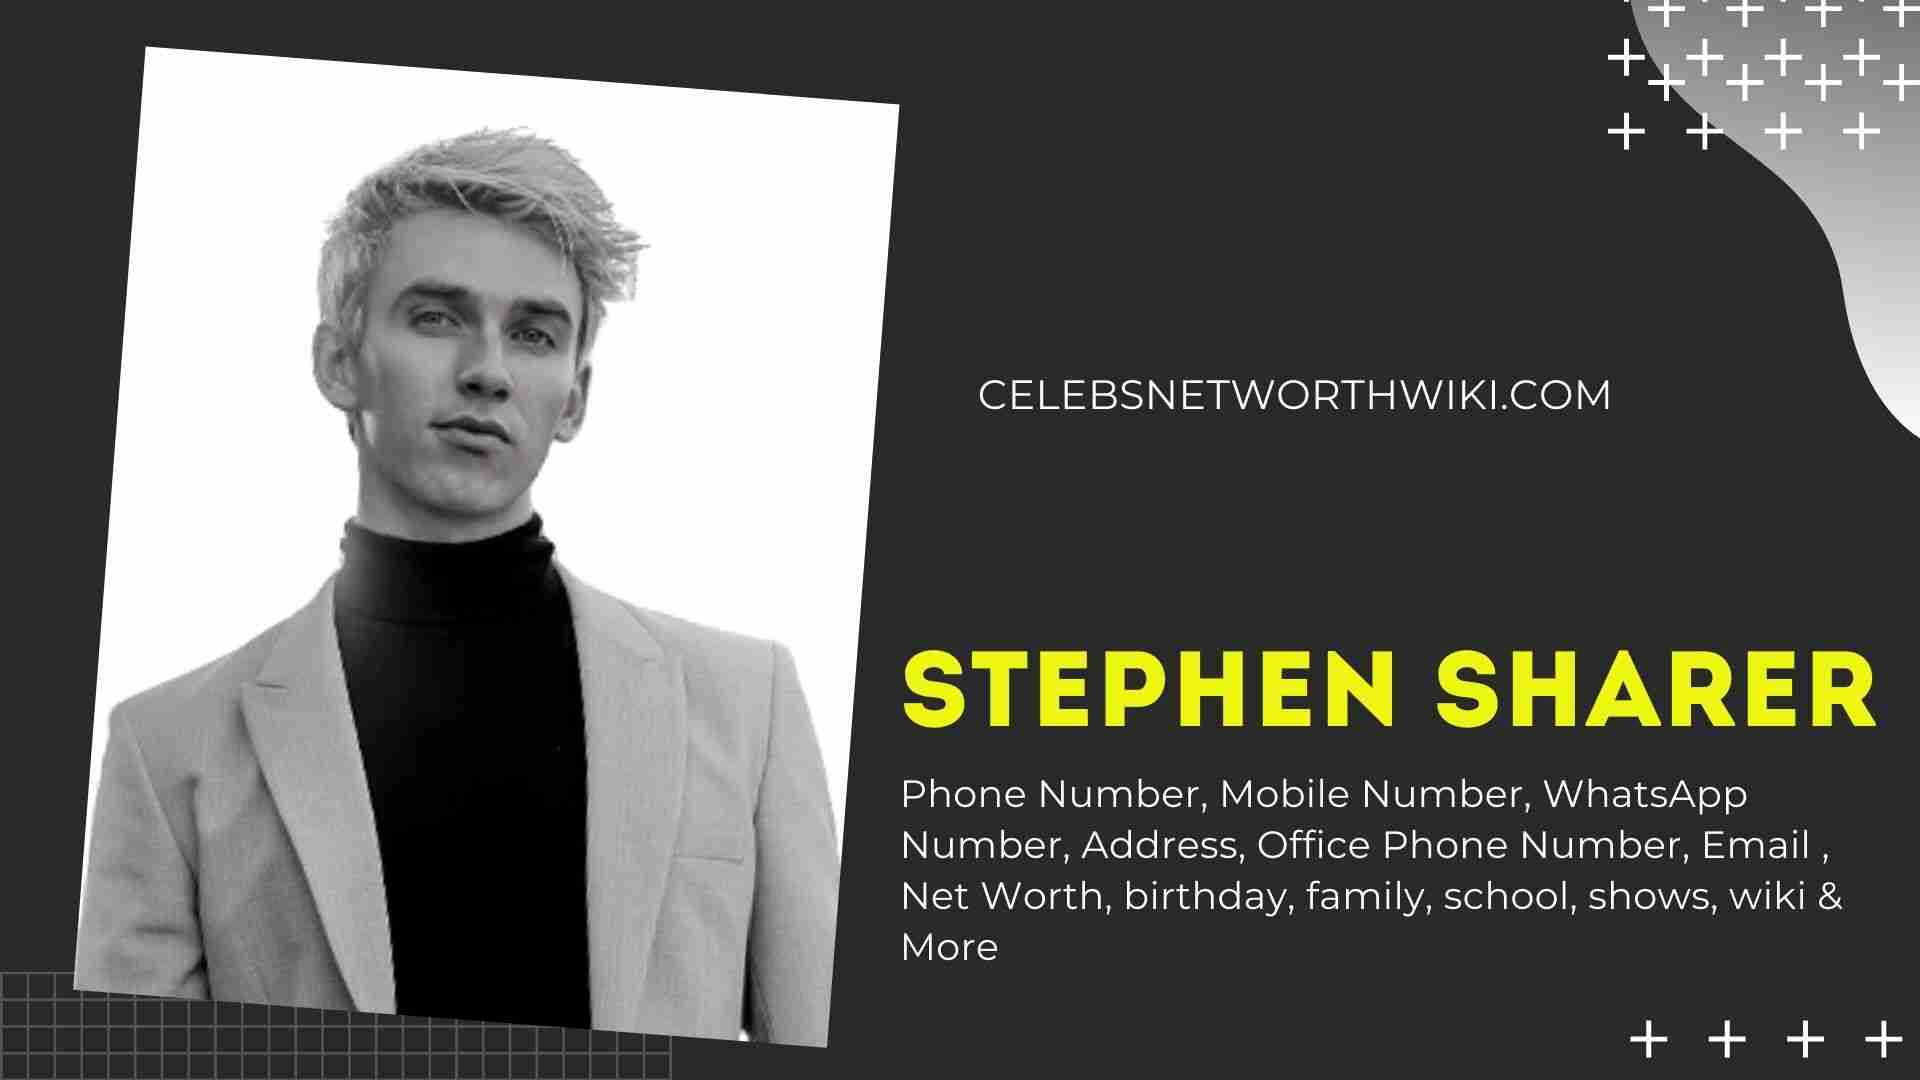 Stephen Sharer Phone Number WhatsApp Number Contact Mobile